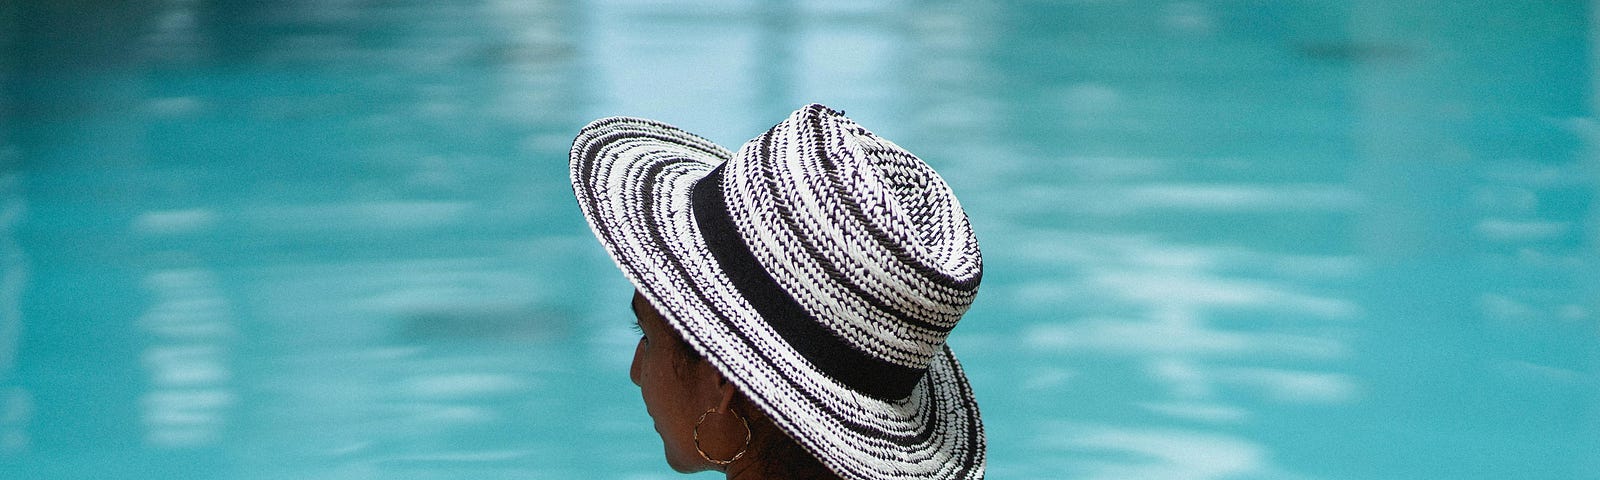 Back view of a lady resting with her arms at the edge of a pool, looking left. Photo by Armin Rimoldi on Pexels.